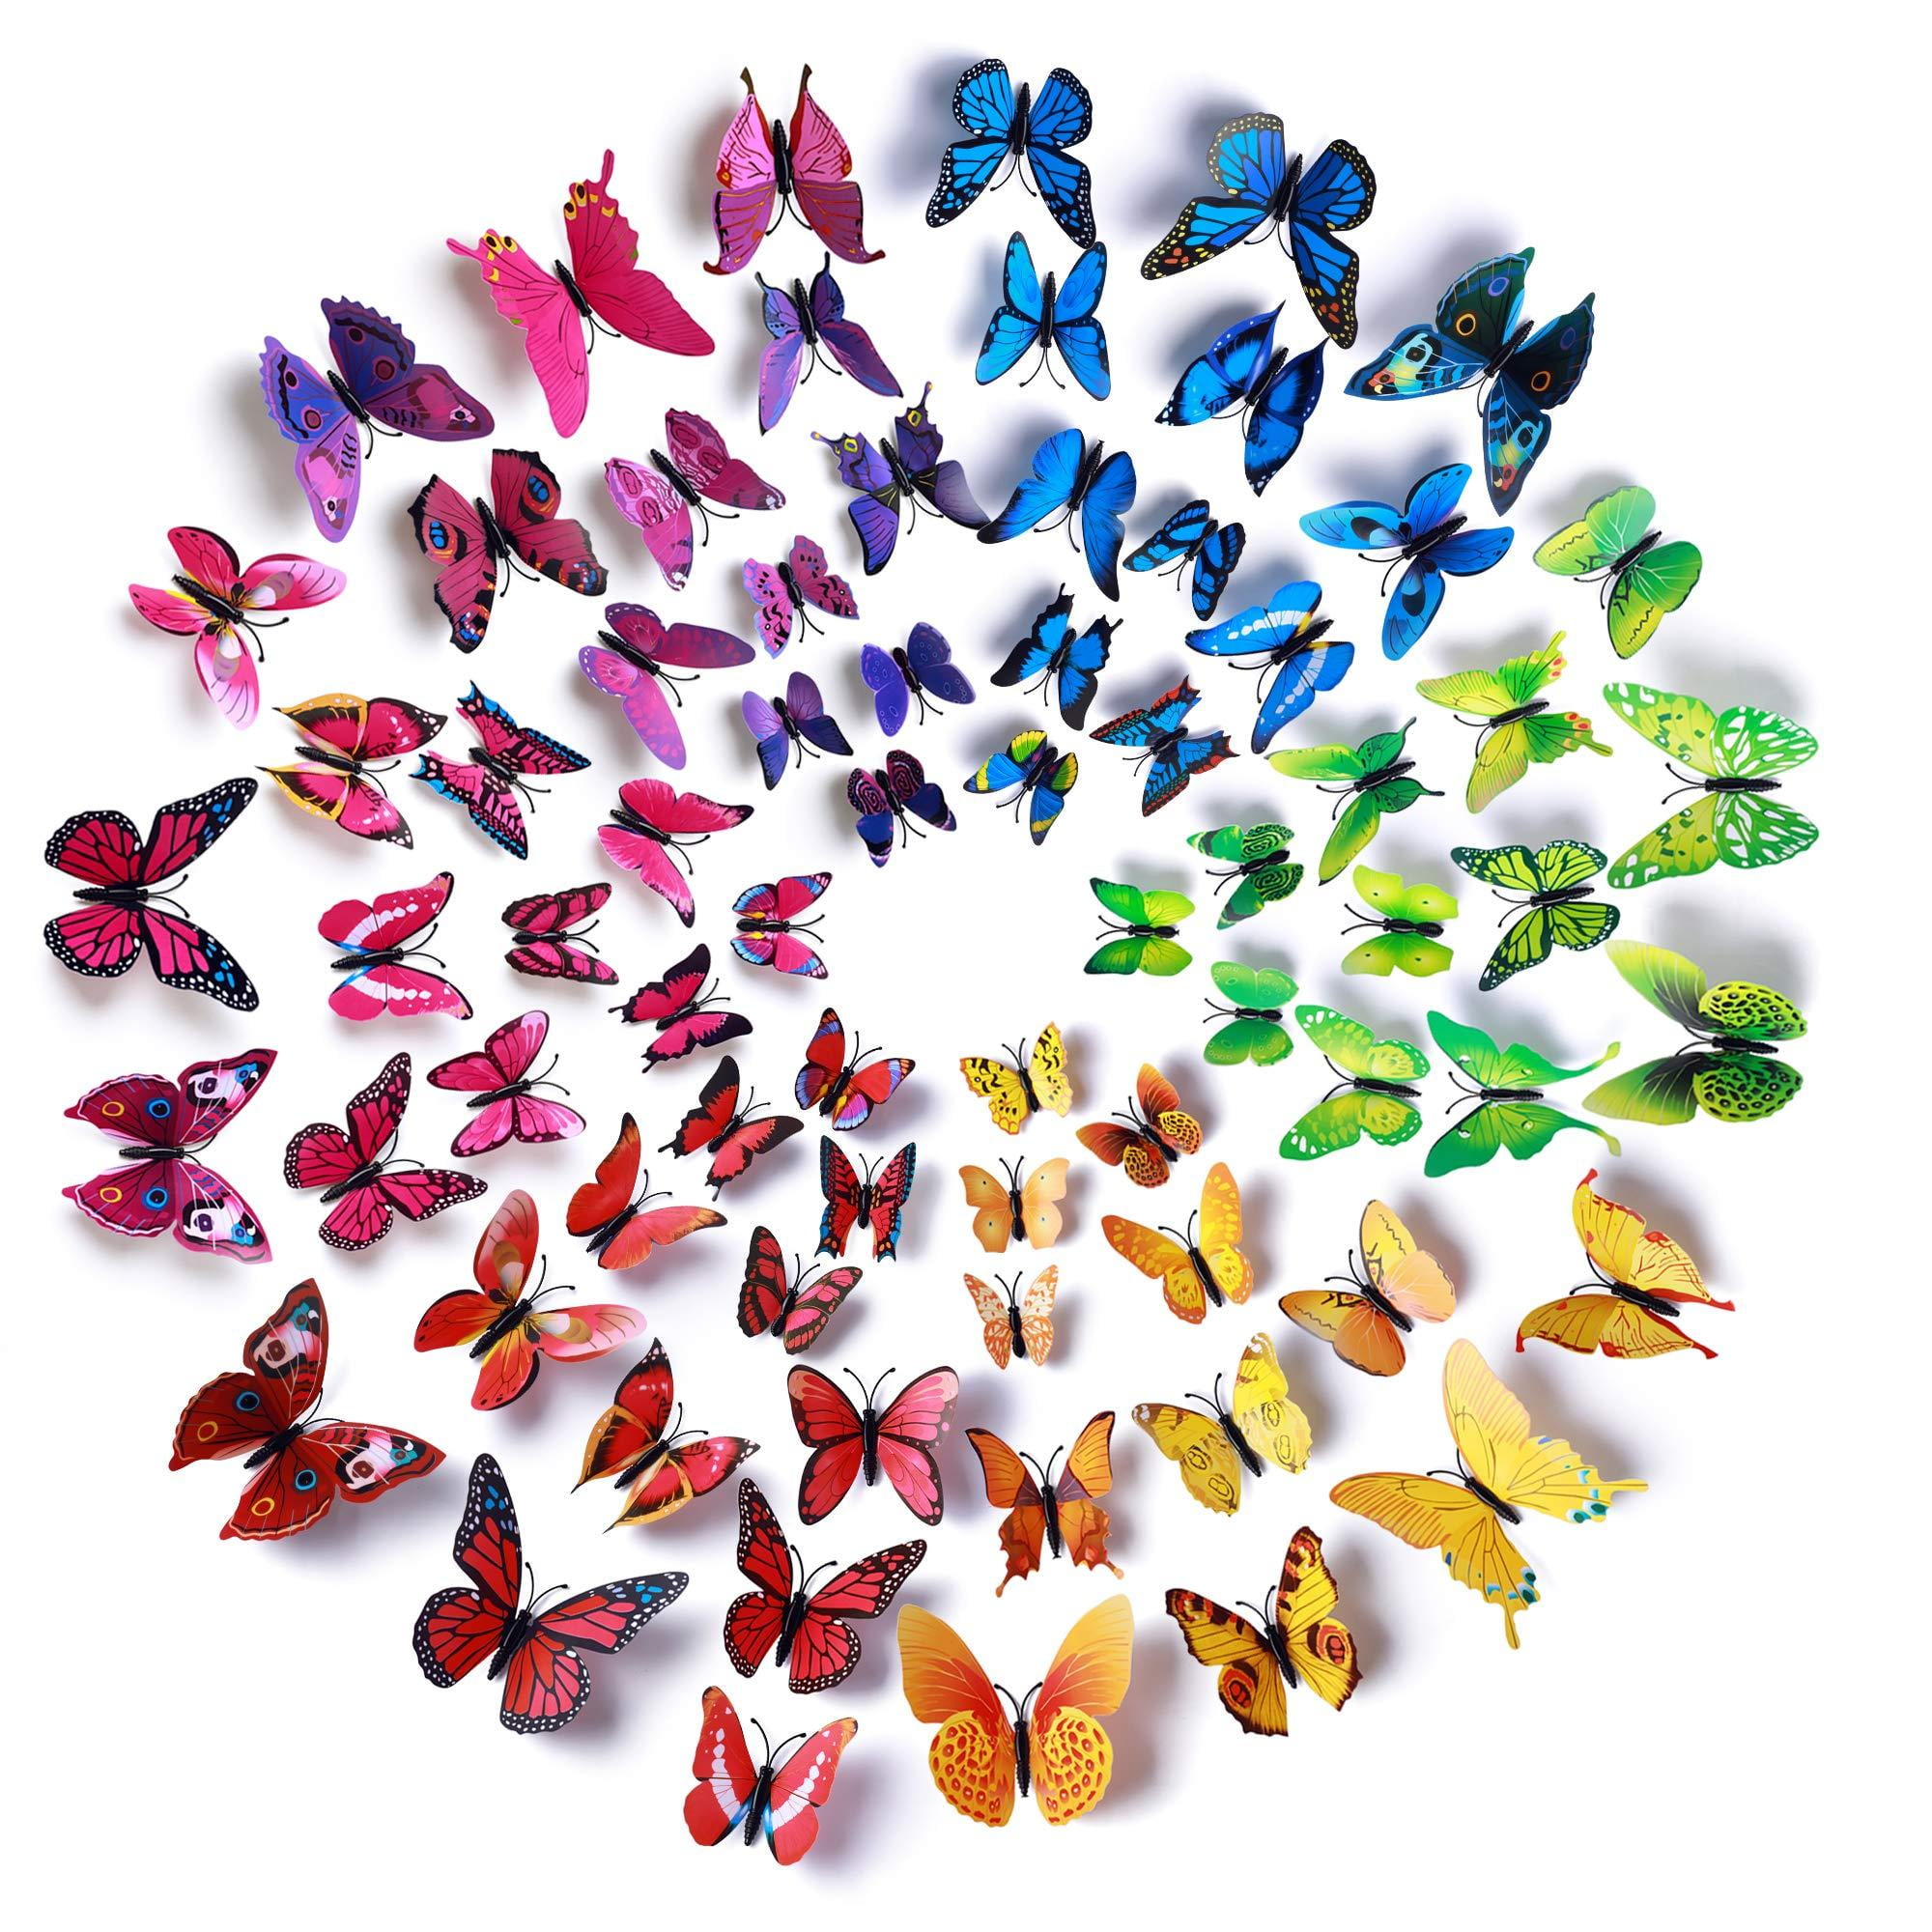 Beautiful 3D Butterfly Wall Decals Removable with Magnets DIY Home Decorations Art Decor Wall Stickers & Murals for Babys Bedroom TV Background Living Room Wall Art Home Decor  72 pcs in 6 Colors